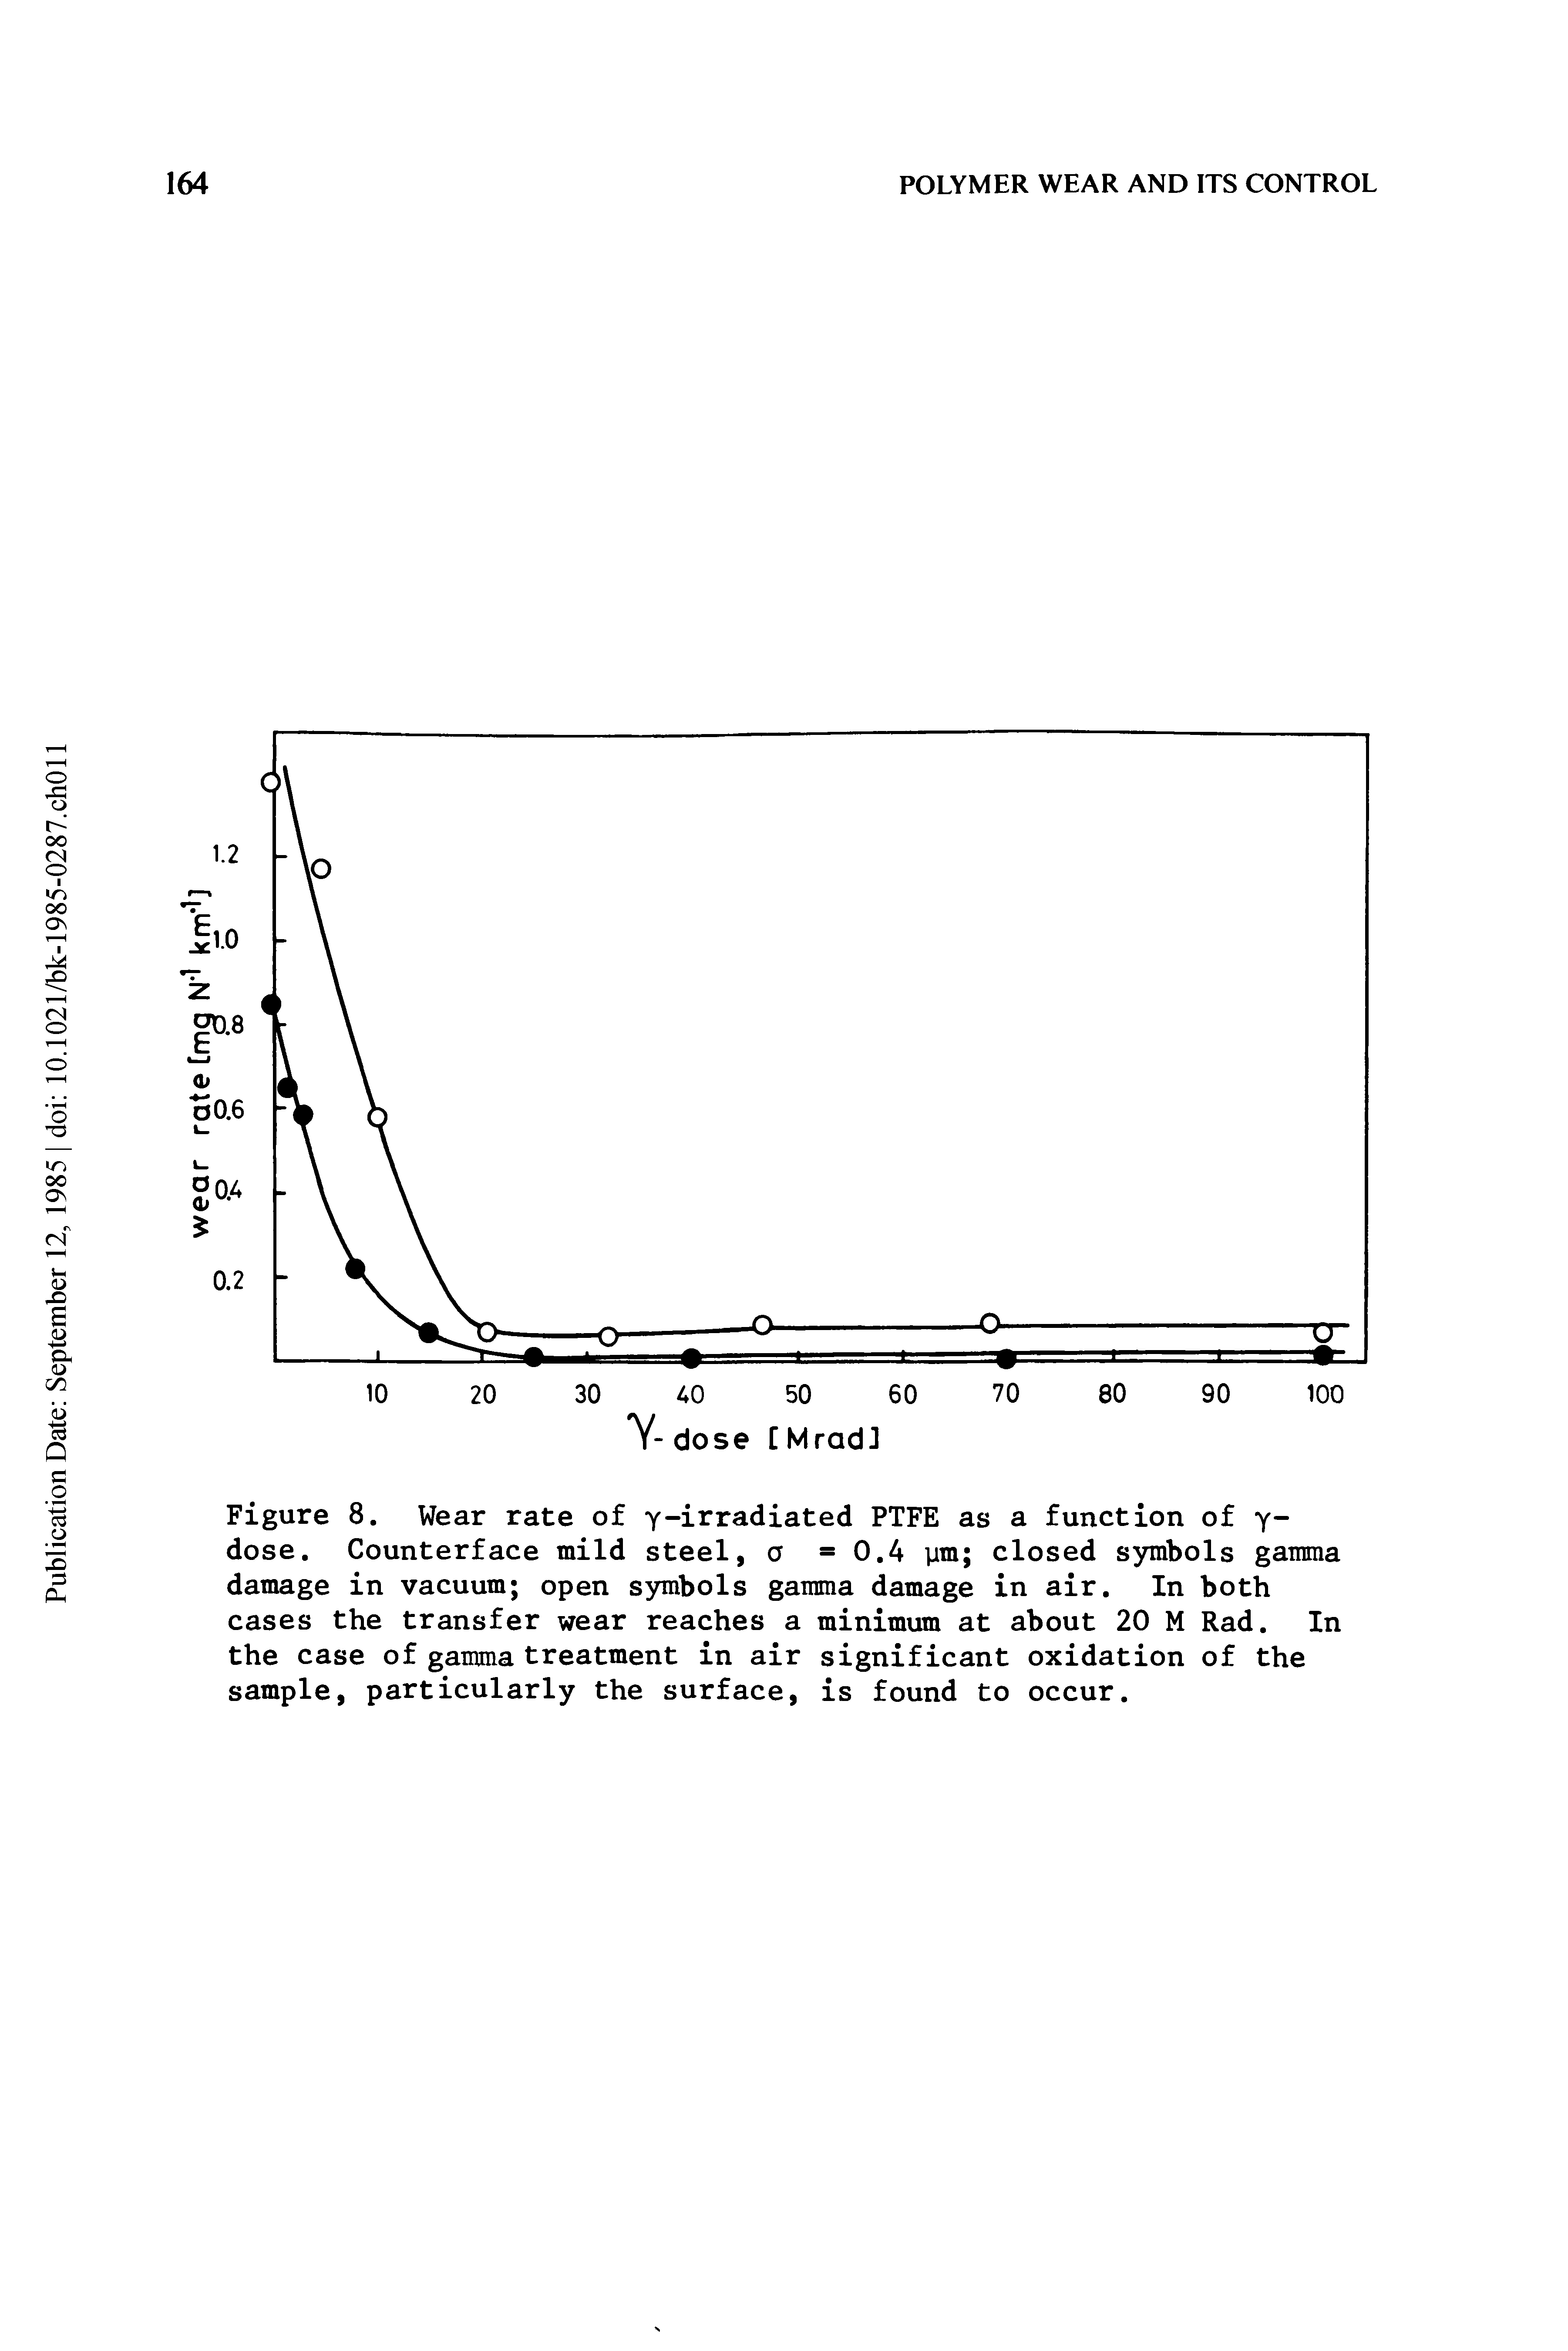 Figure 8. Wear rate of y-ii Tadiated PTFE as a function of y dose. Counterface mild steel, a =0.4 ym closed symbols gamma damage in vacuum open symbols gamma damage in air. In both cases the transfer wear reaches a minimum at about 20 M Rad. In the case of gamma treatment in air significant oxidation of the sample, particularly the surface, is found to occur.